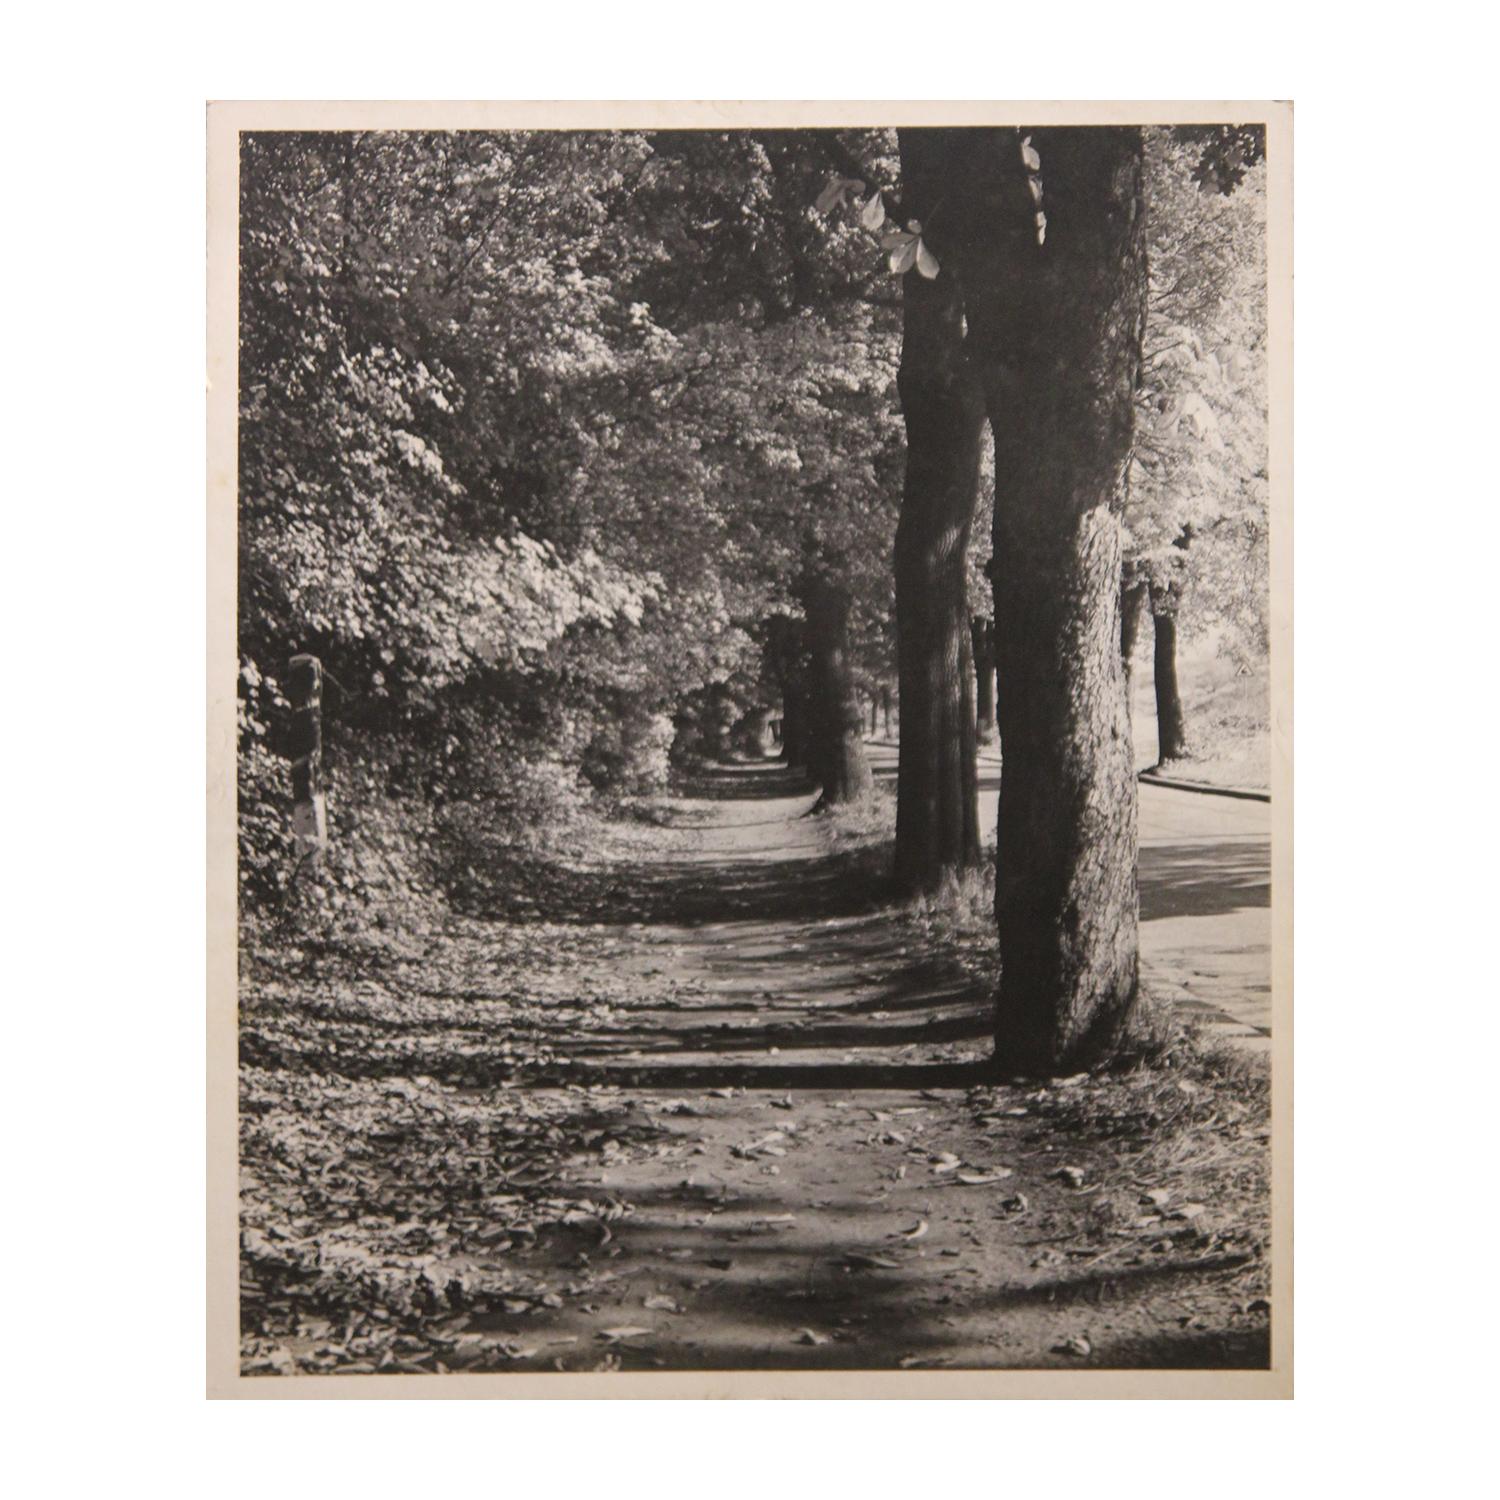 Unknown Black and White Photograph - Black and White Perspective Photograph of Sidewalk with Trees